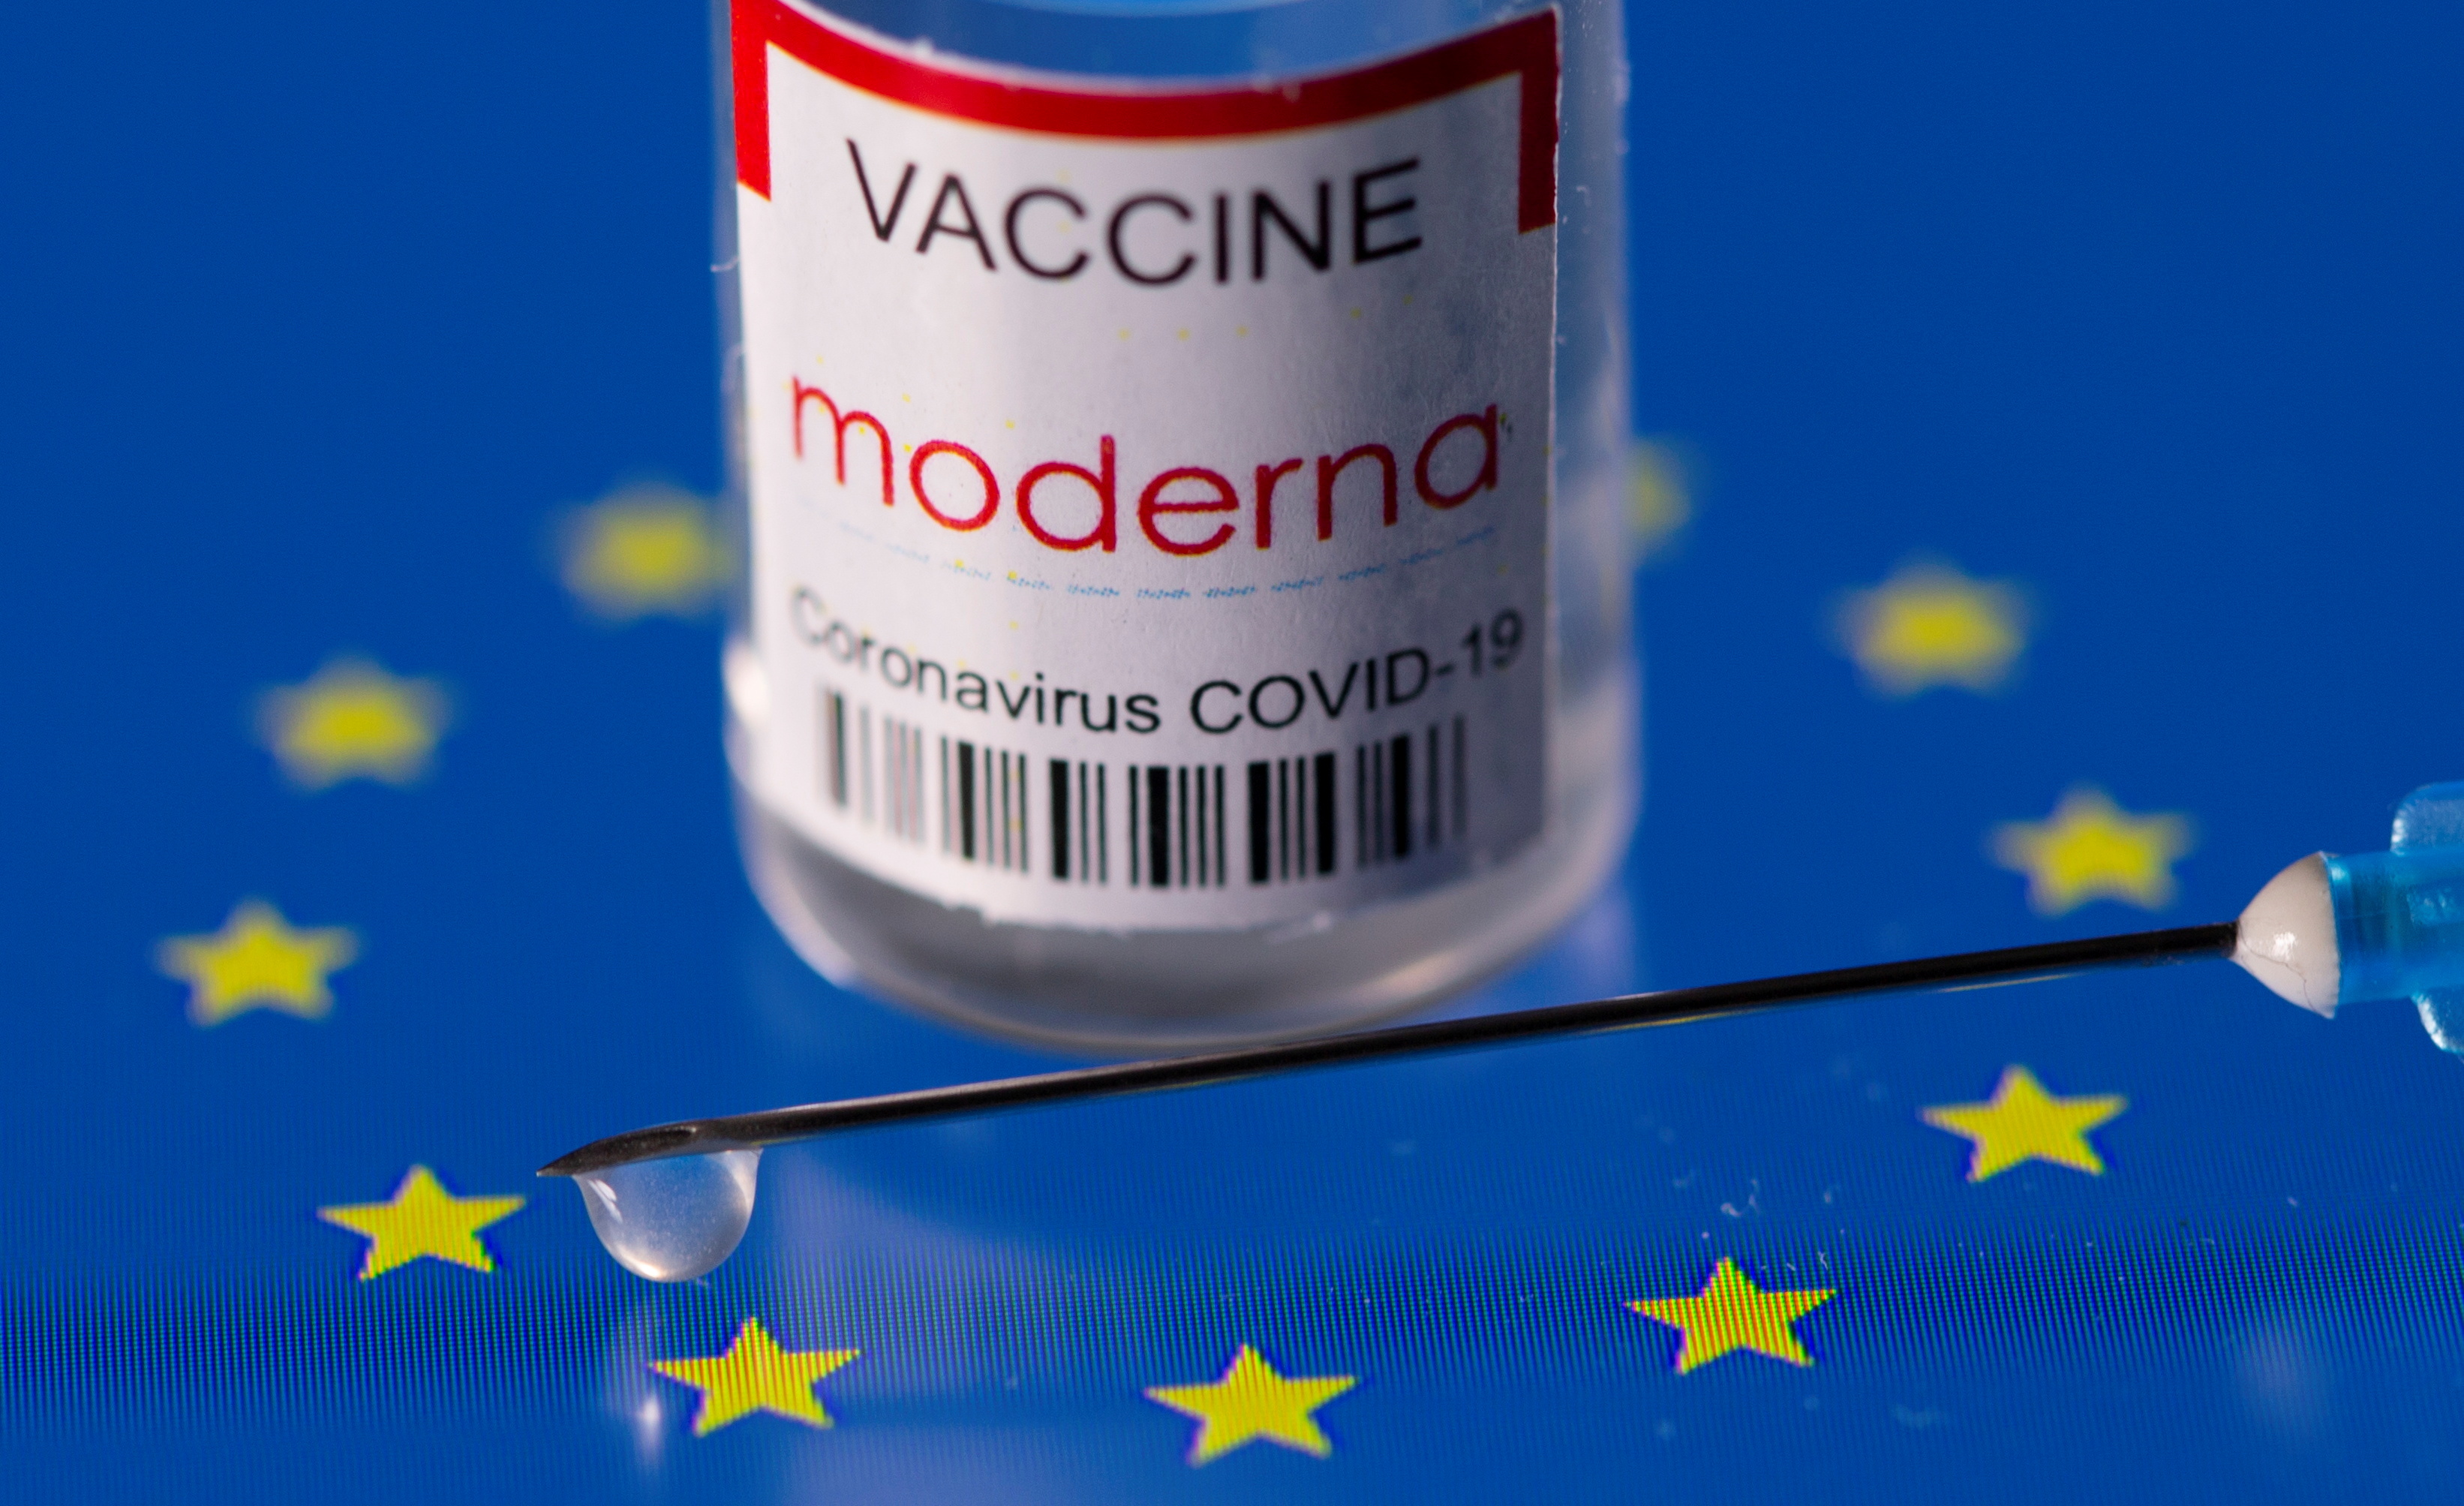 Vial labelled "Moderna coronavirus disease (COVID-19) vaccine" placed on displayed EU flag is seen in this illustration picture